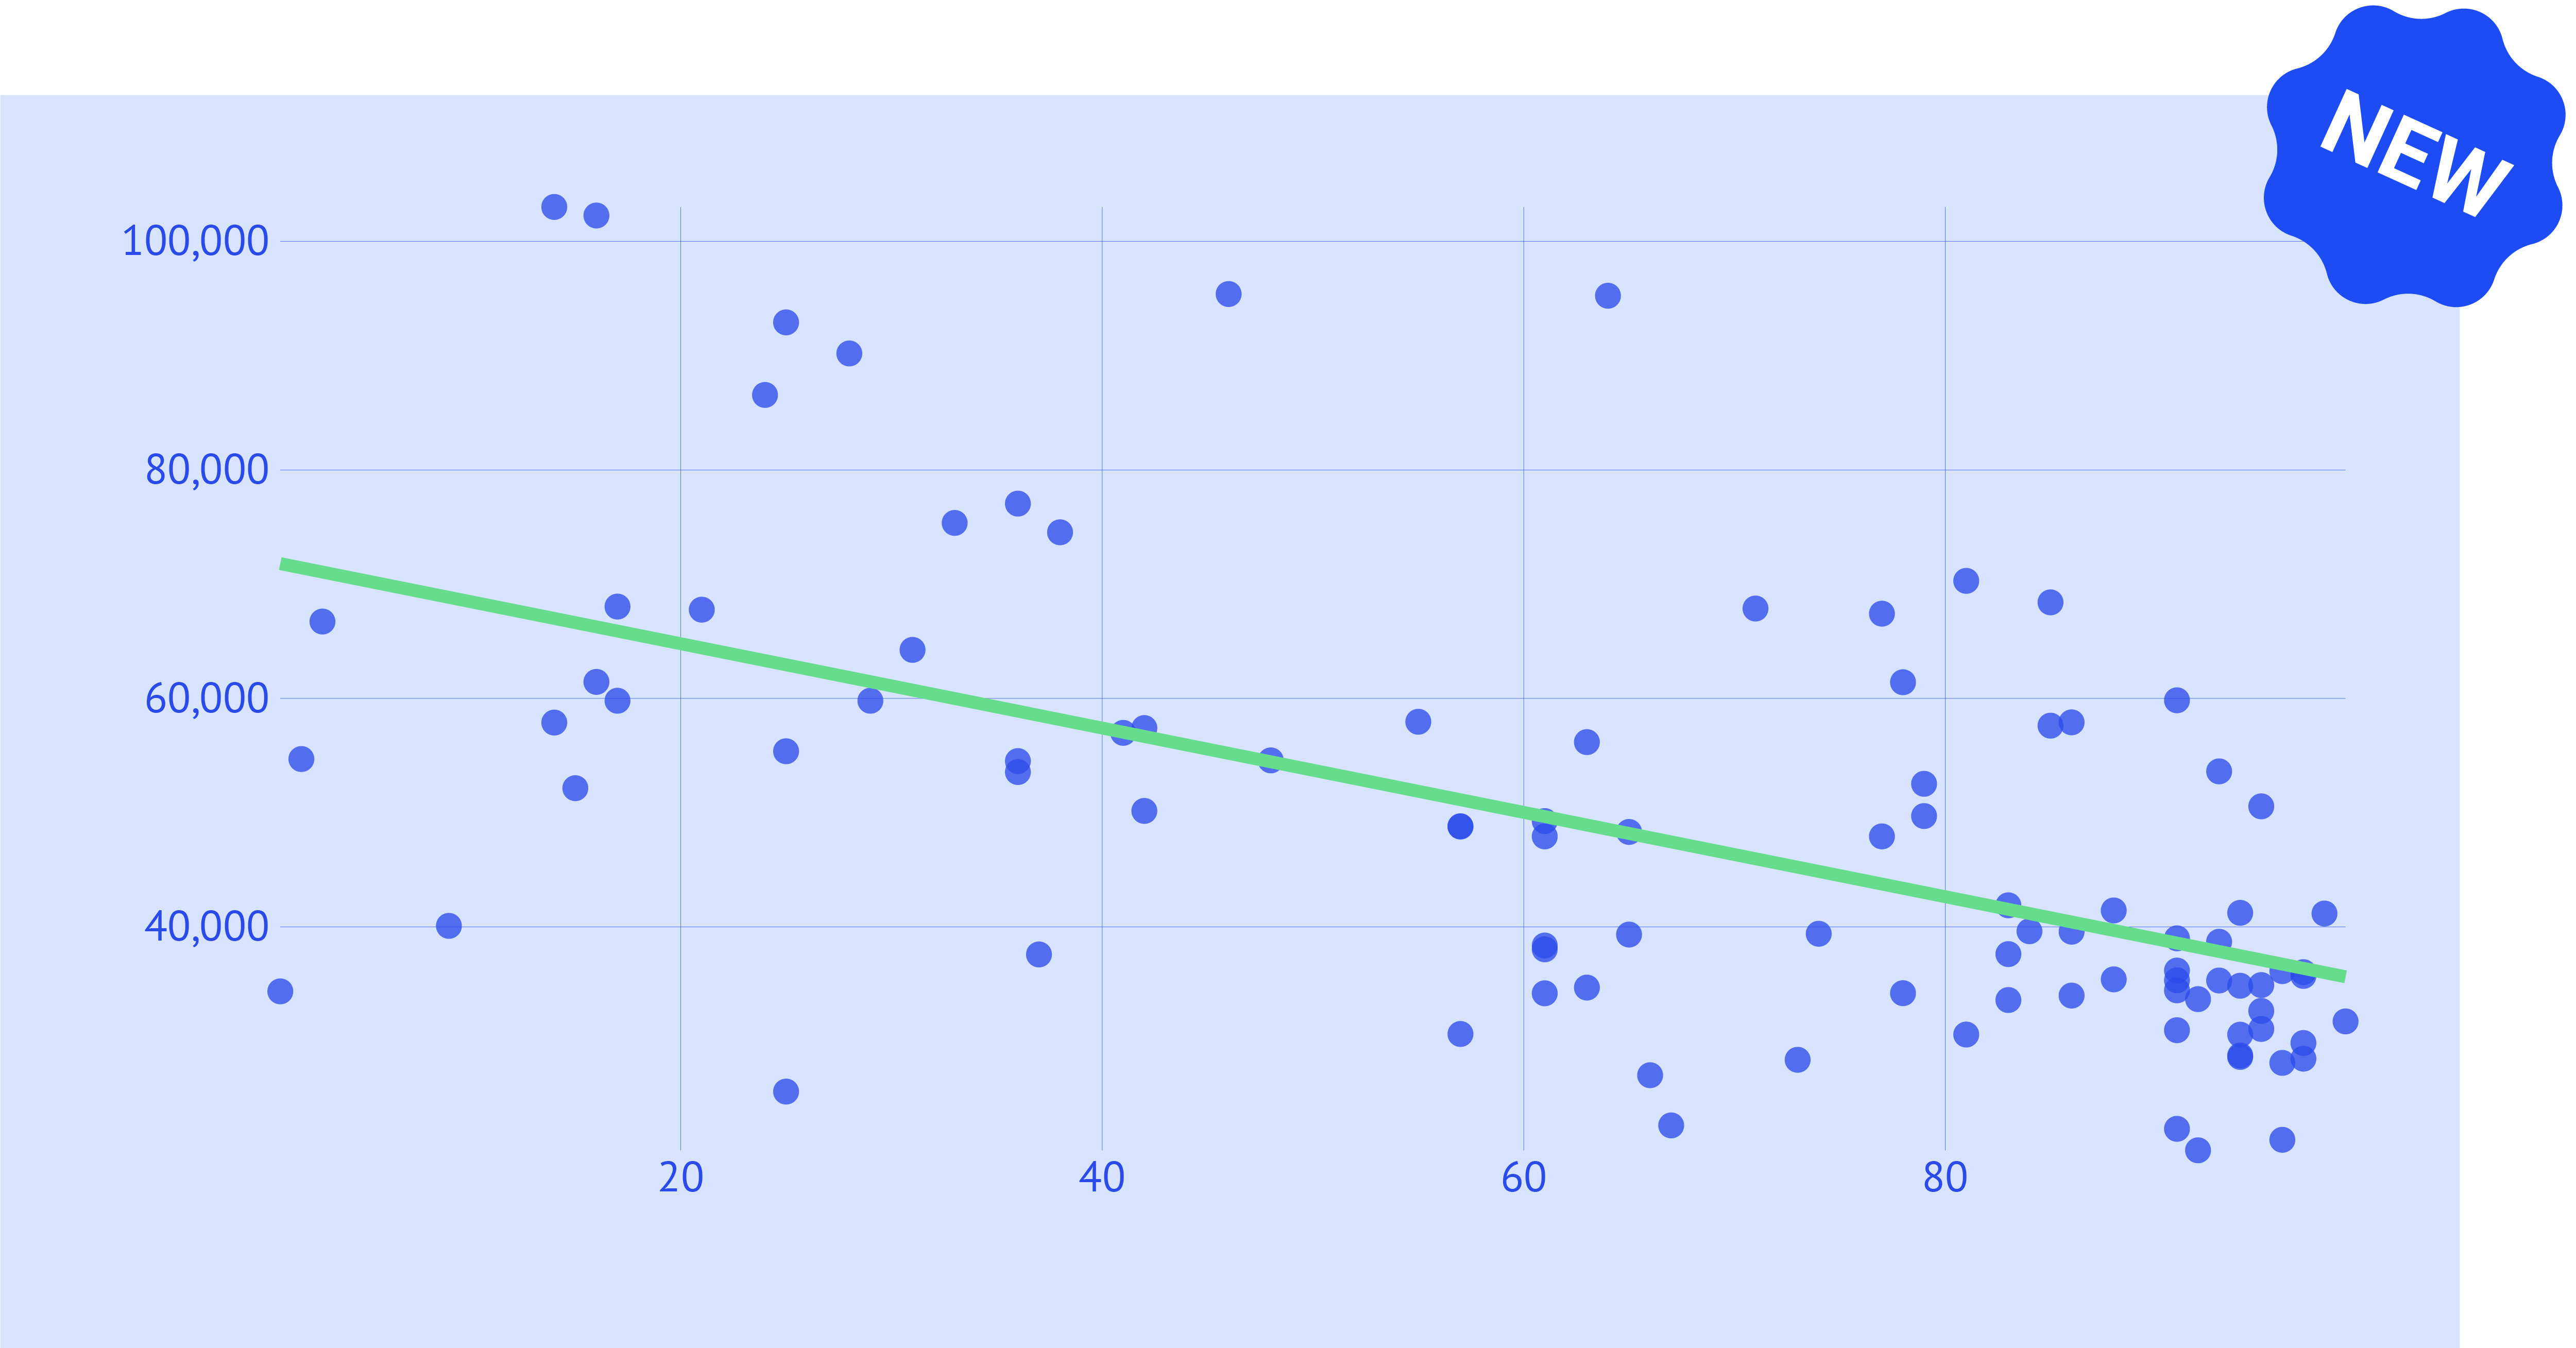 The image has a light blue background and it shows a scatterplot with dark blue dots. A green trend line (regression line) is visible in the middle of the chart.